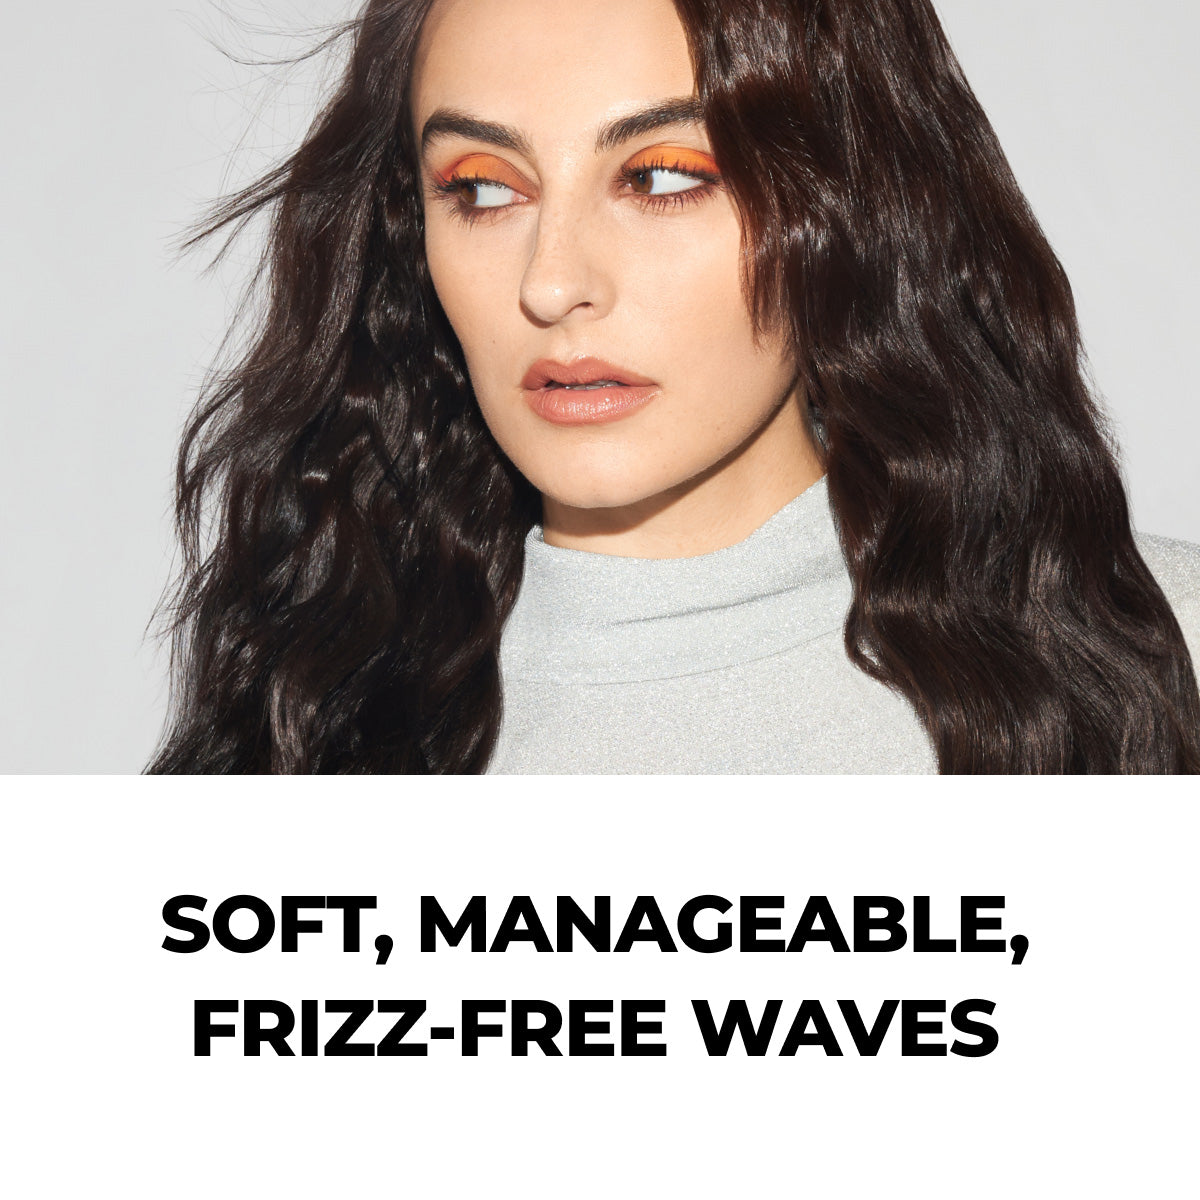 Soft, manageable, frizz-free waves.